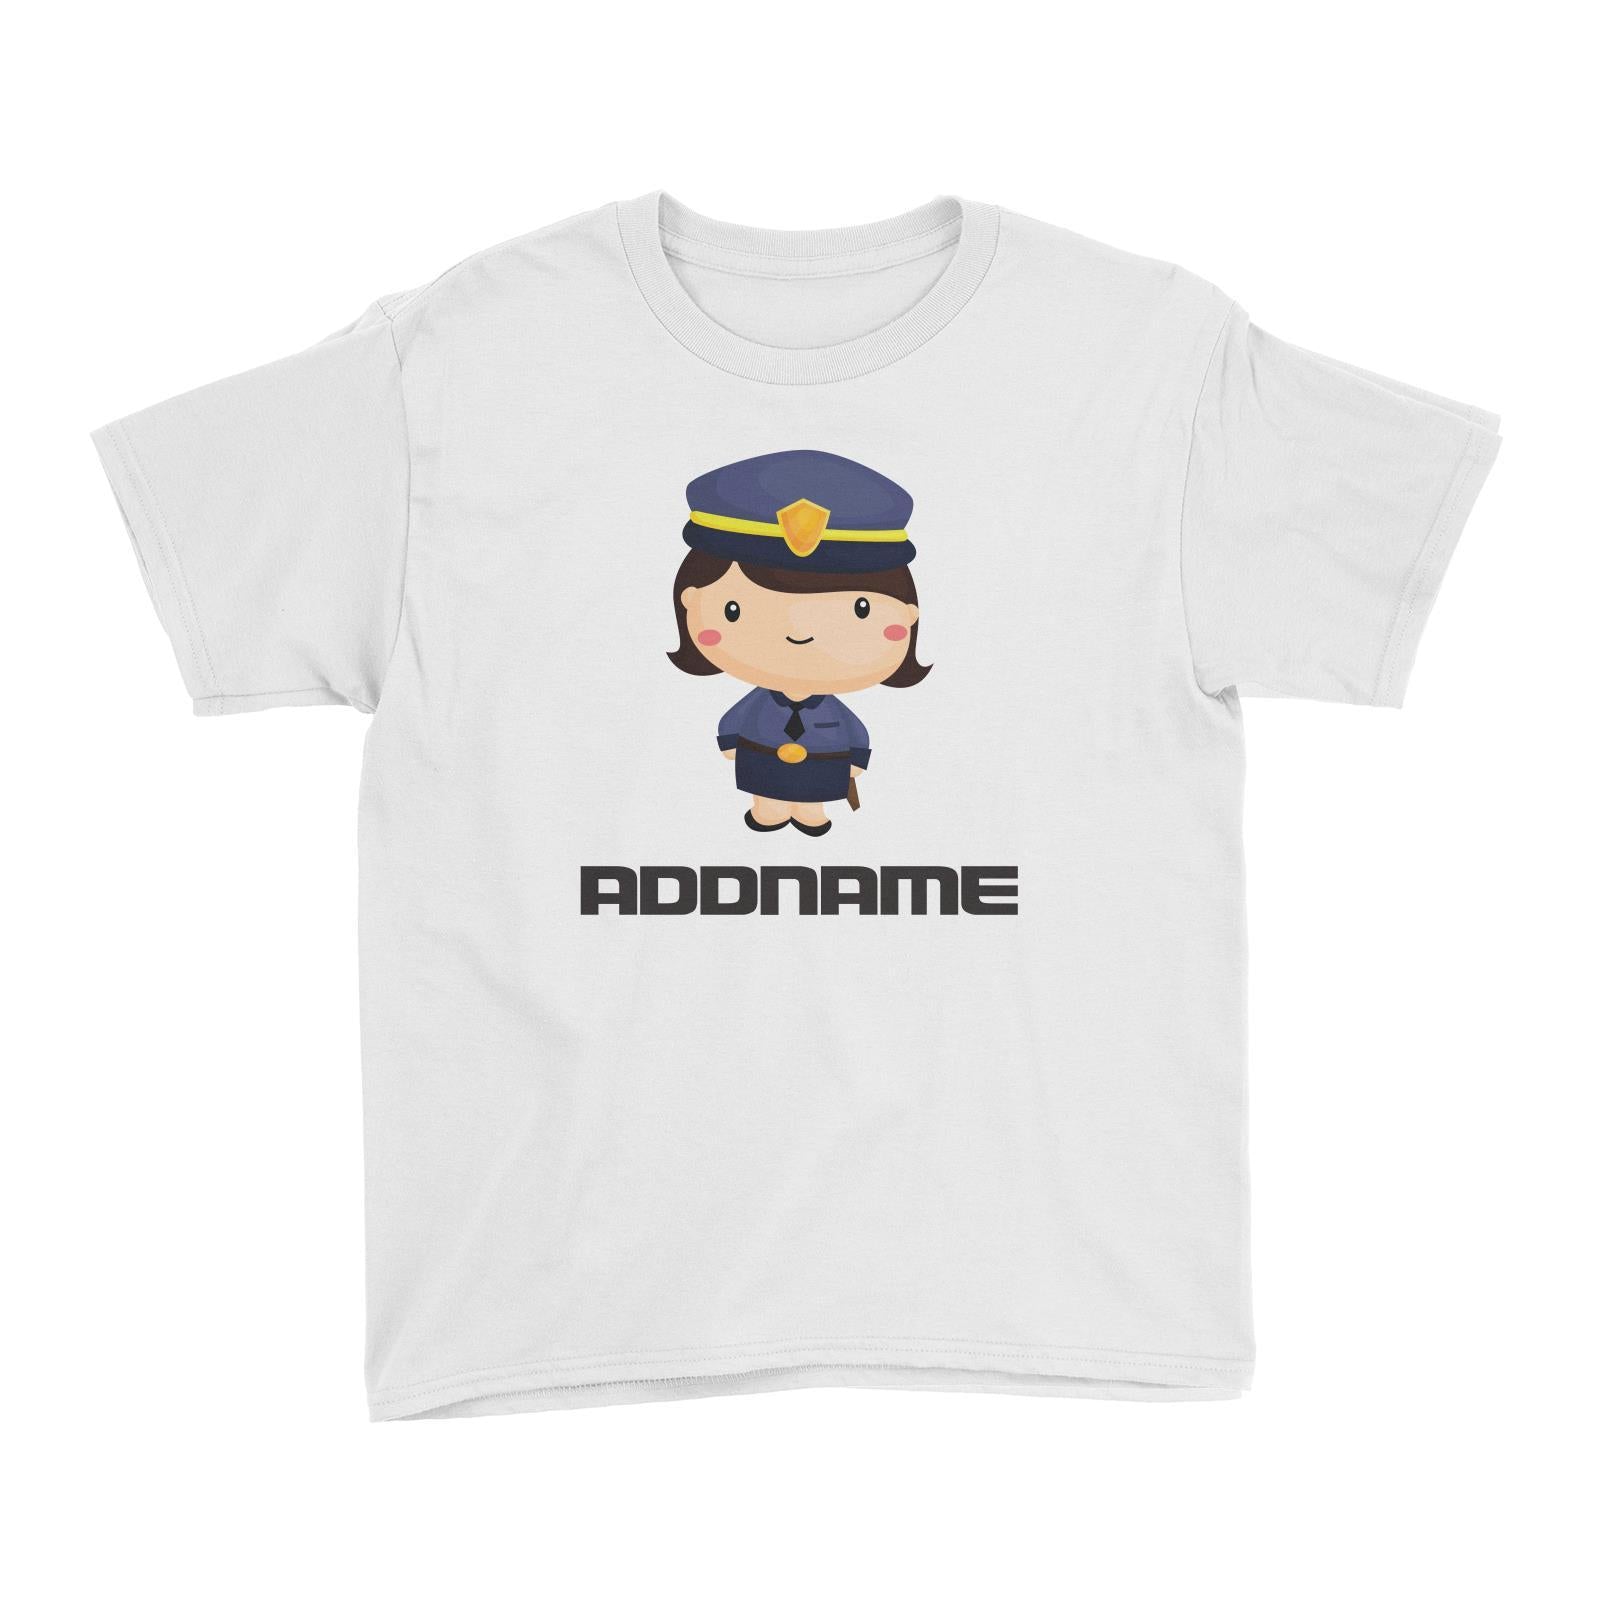 Birthday Police Officer Short Hair Girl  In Suit Addname Kid's T-Shirt